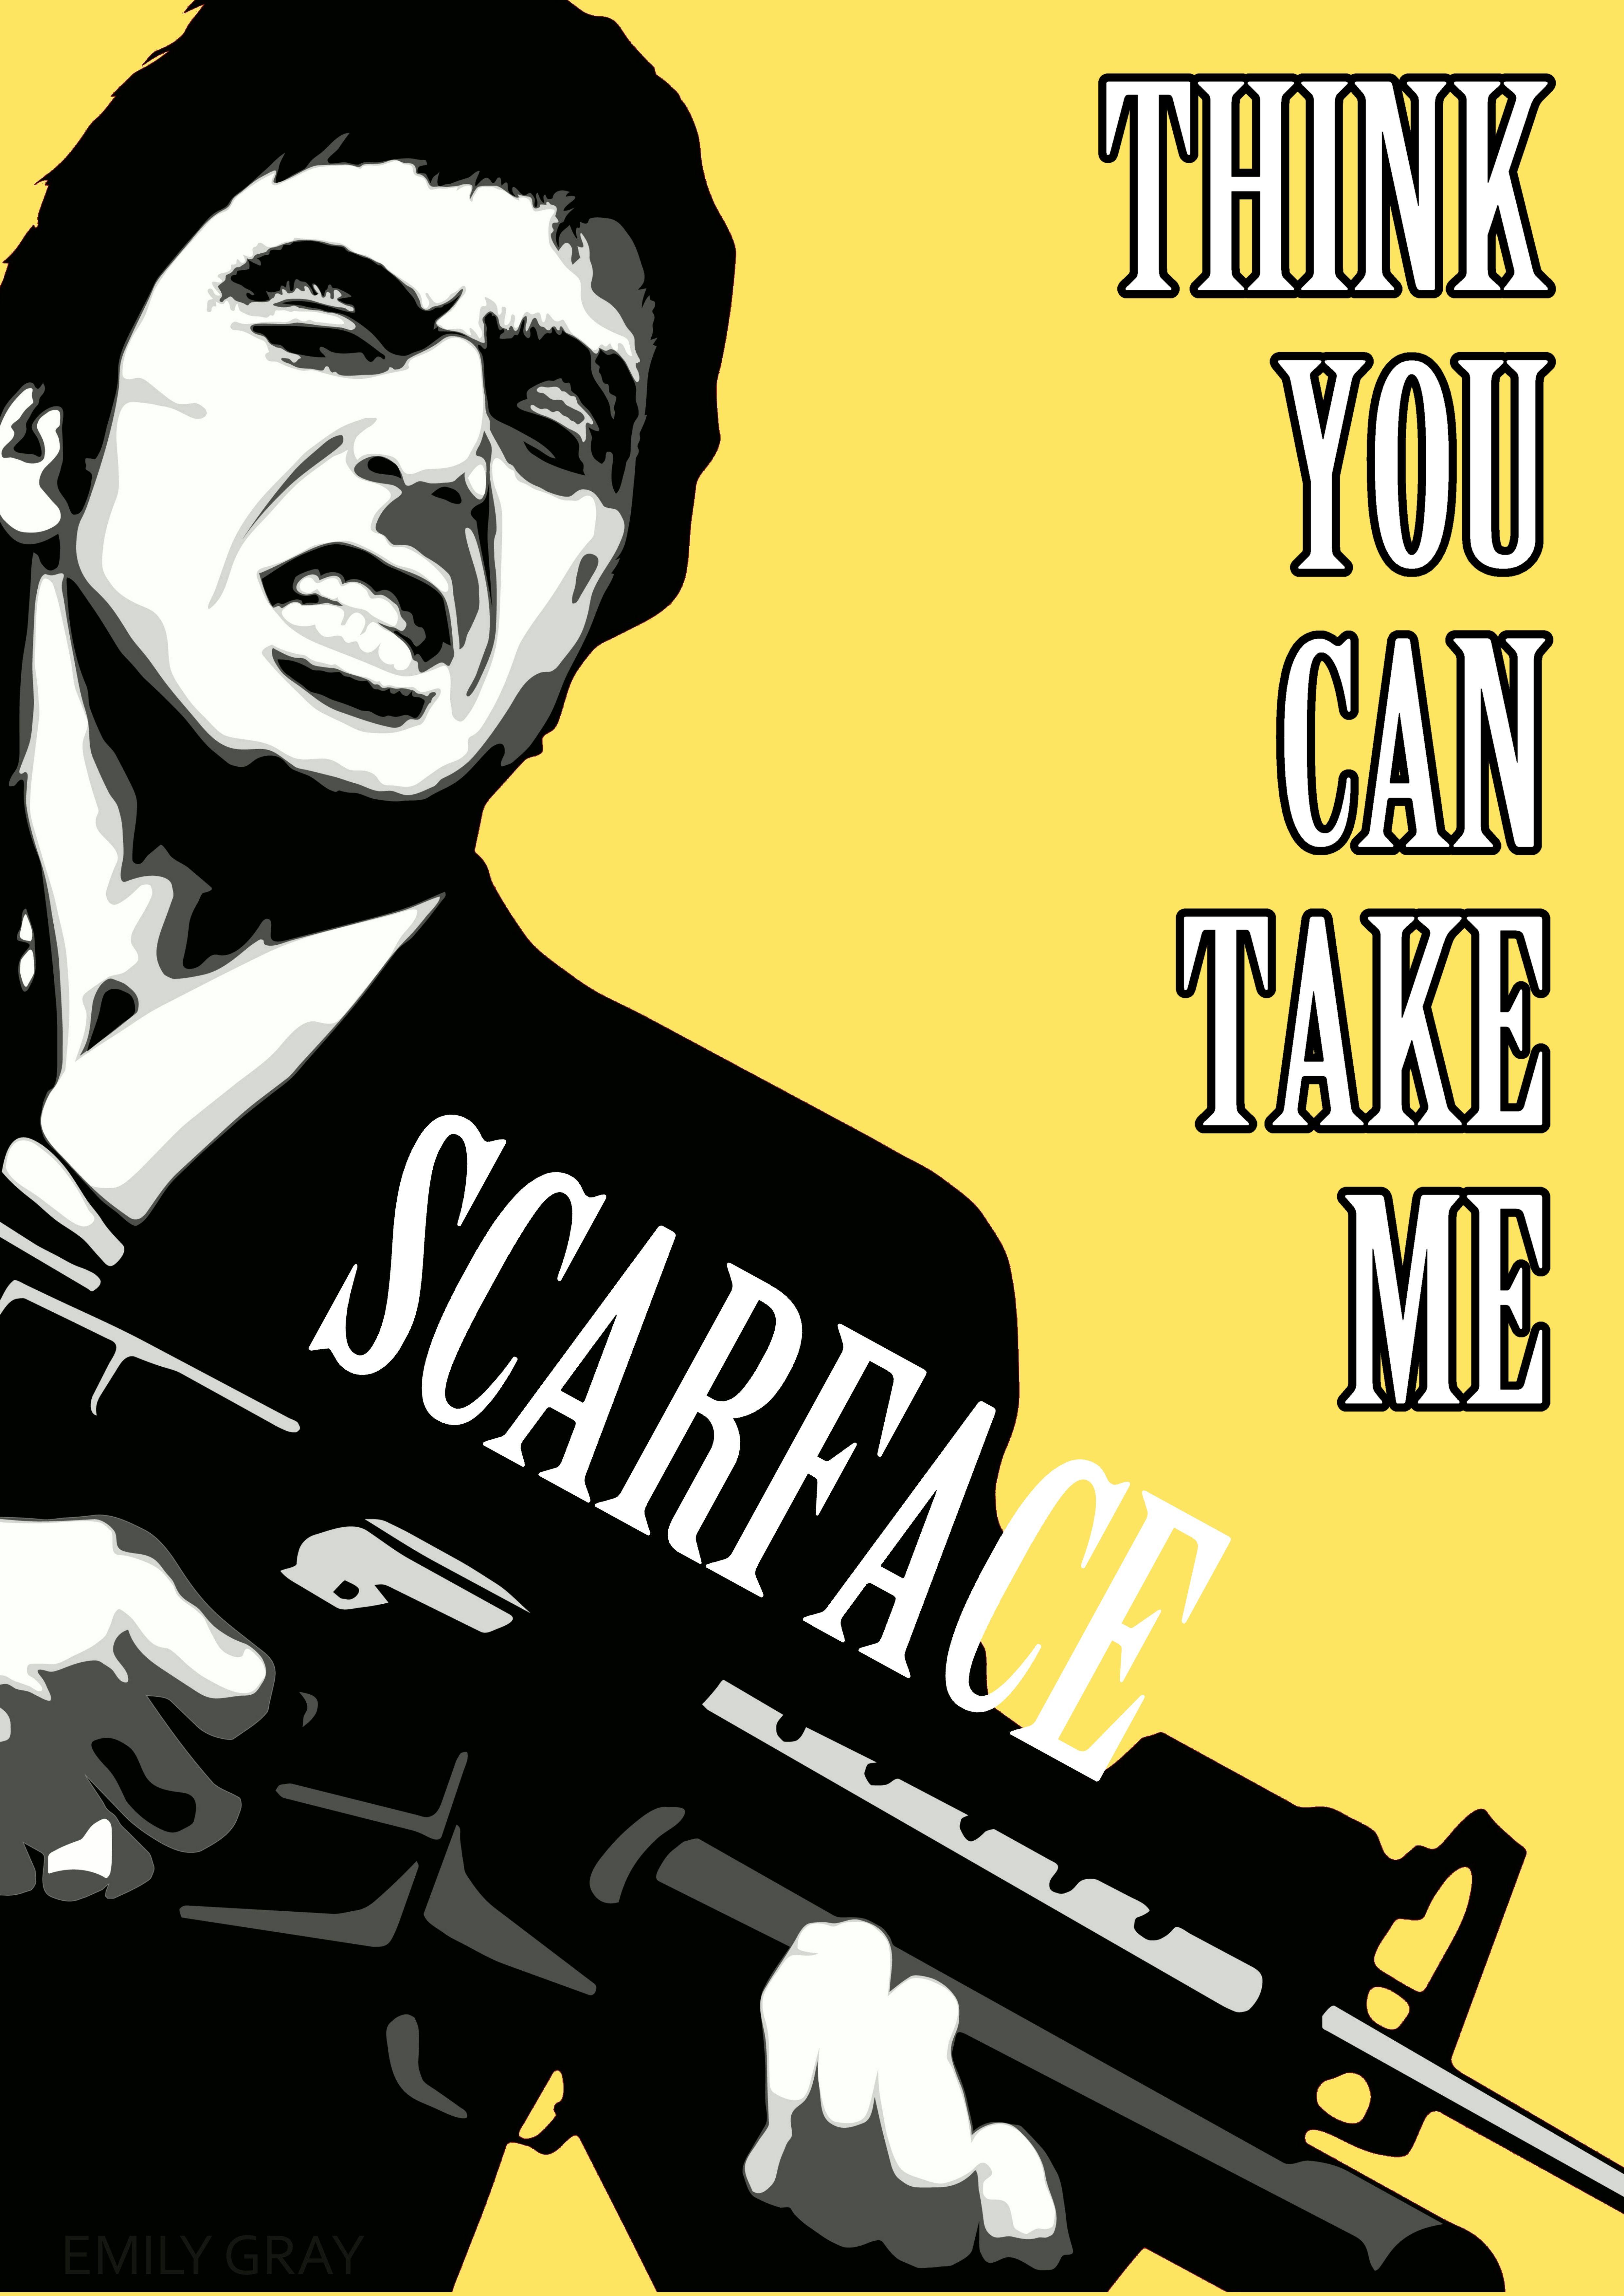 scarface say hello to my little friend wallpaper